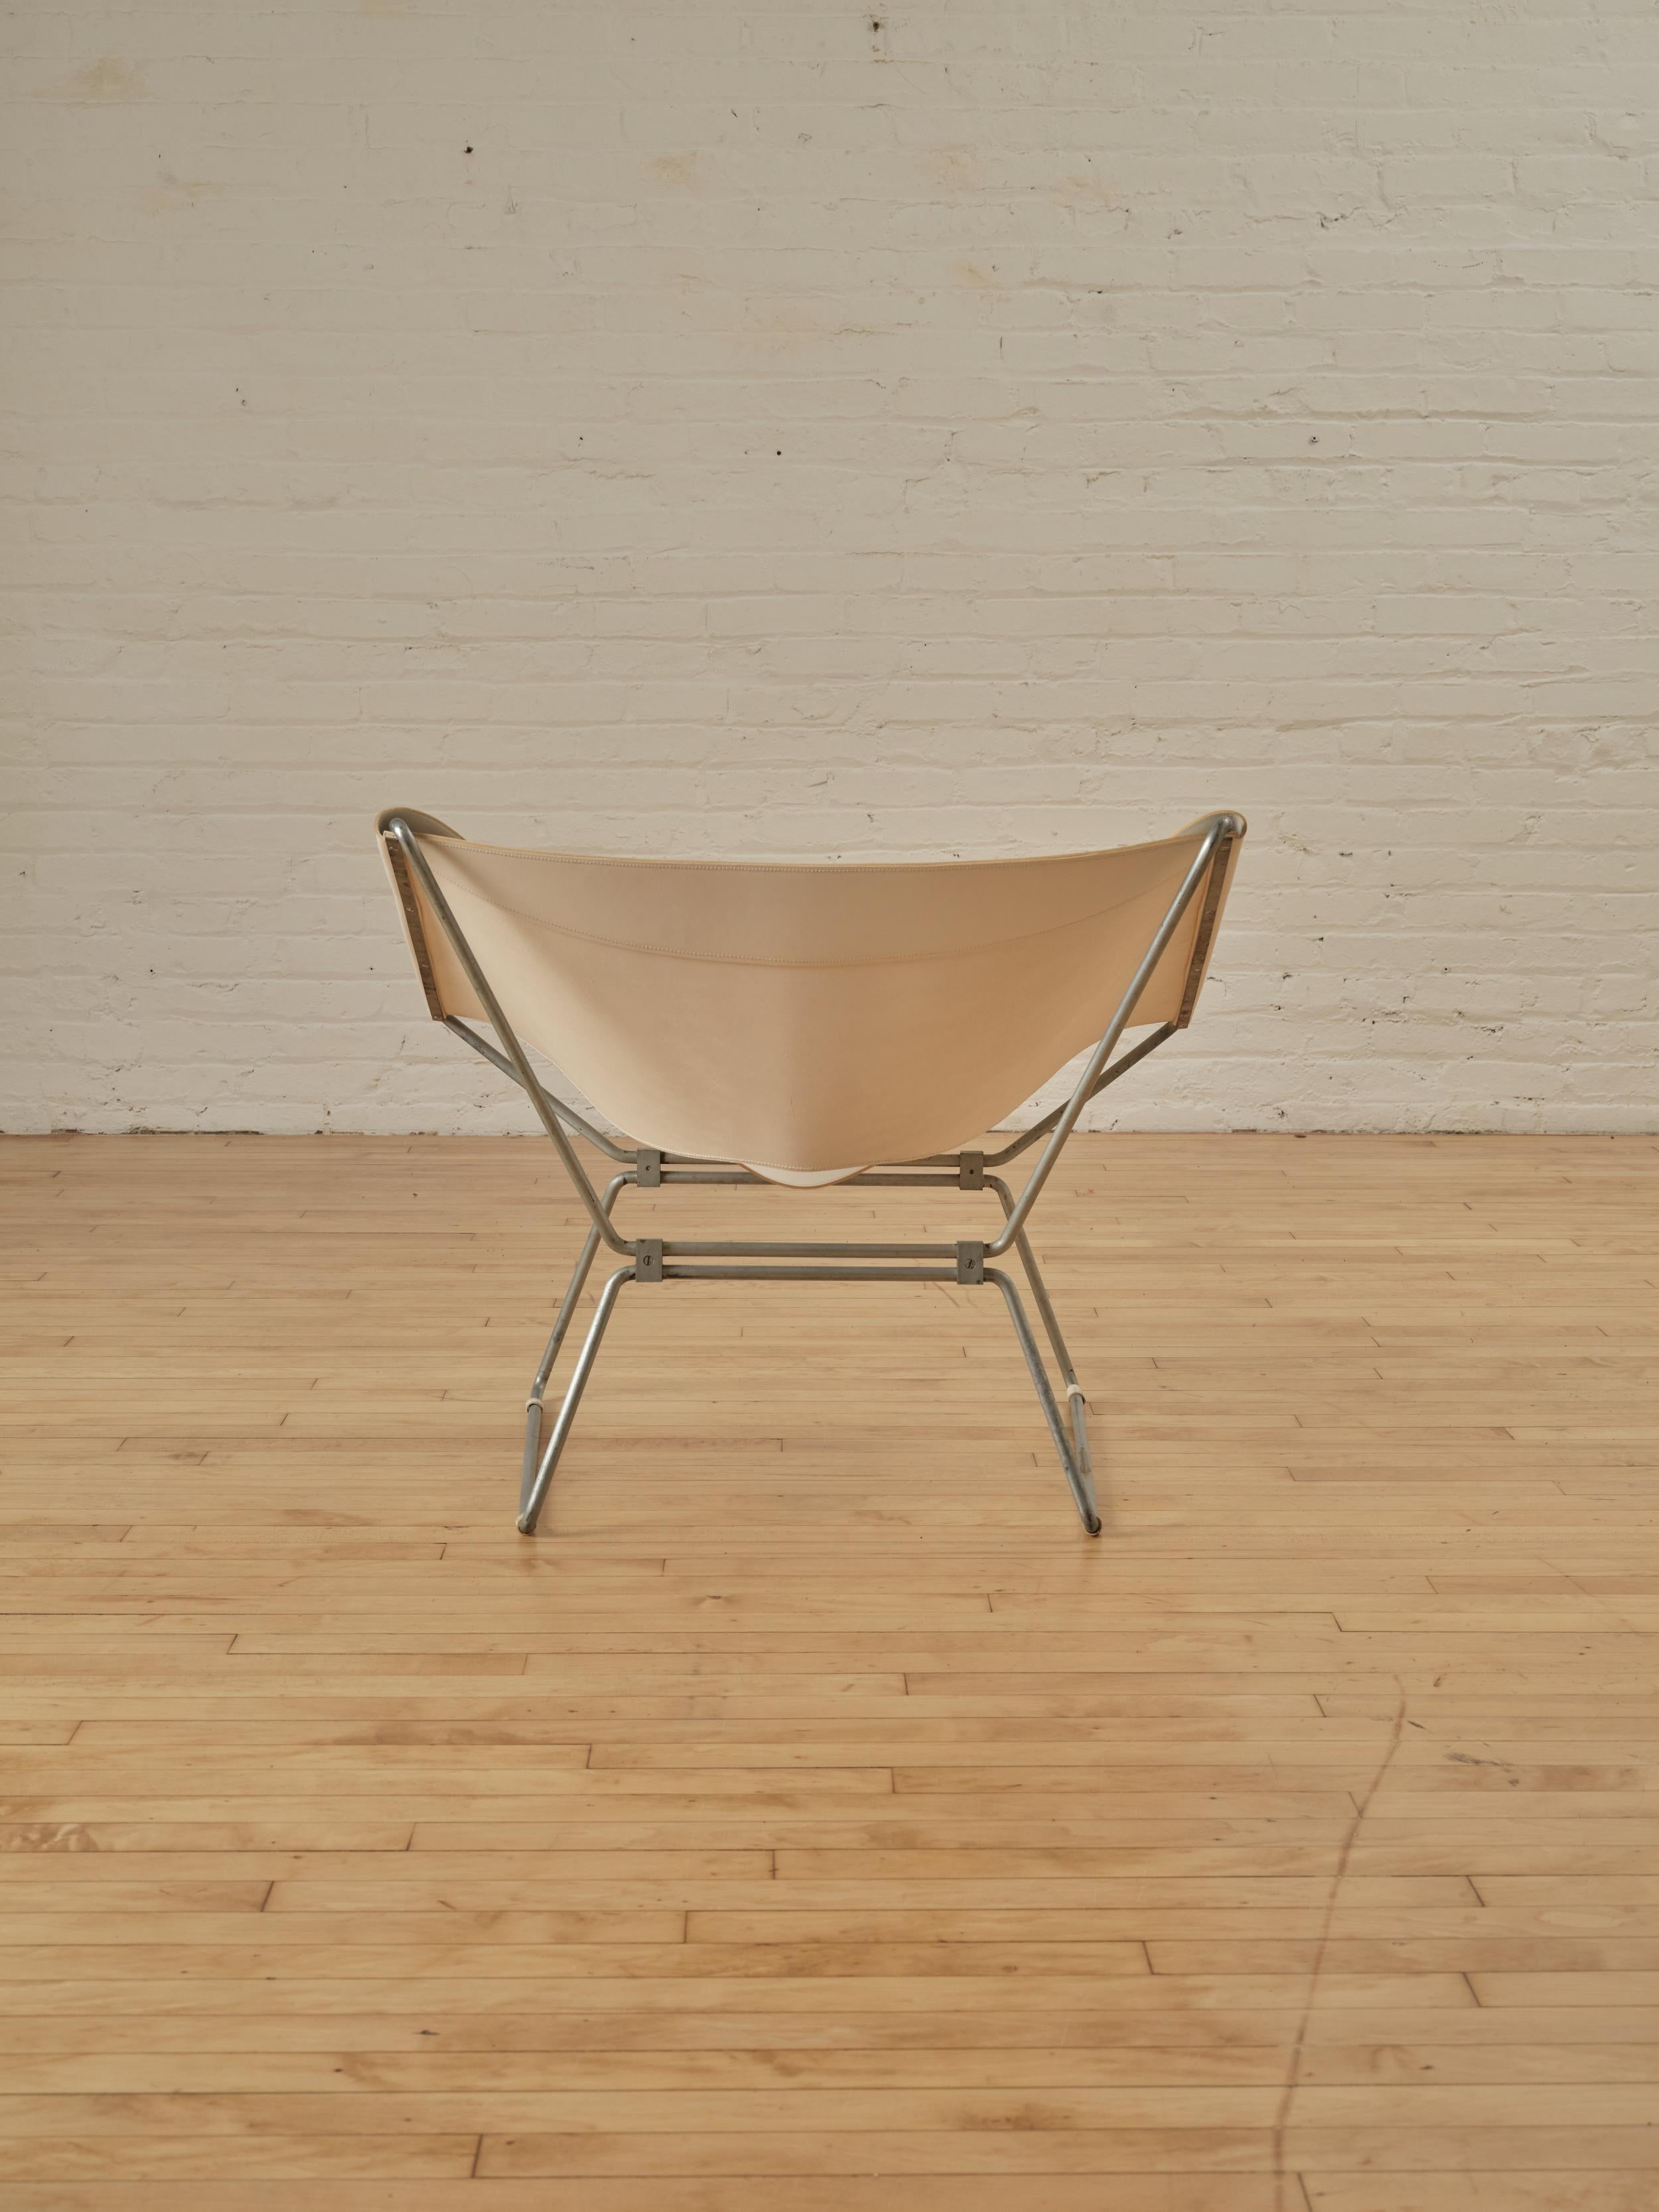 Anneau Chair by Pierre Paulin for AP Polak (Model Ap-14) In Good Condition For Sale In Long Island City, NY